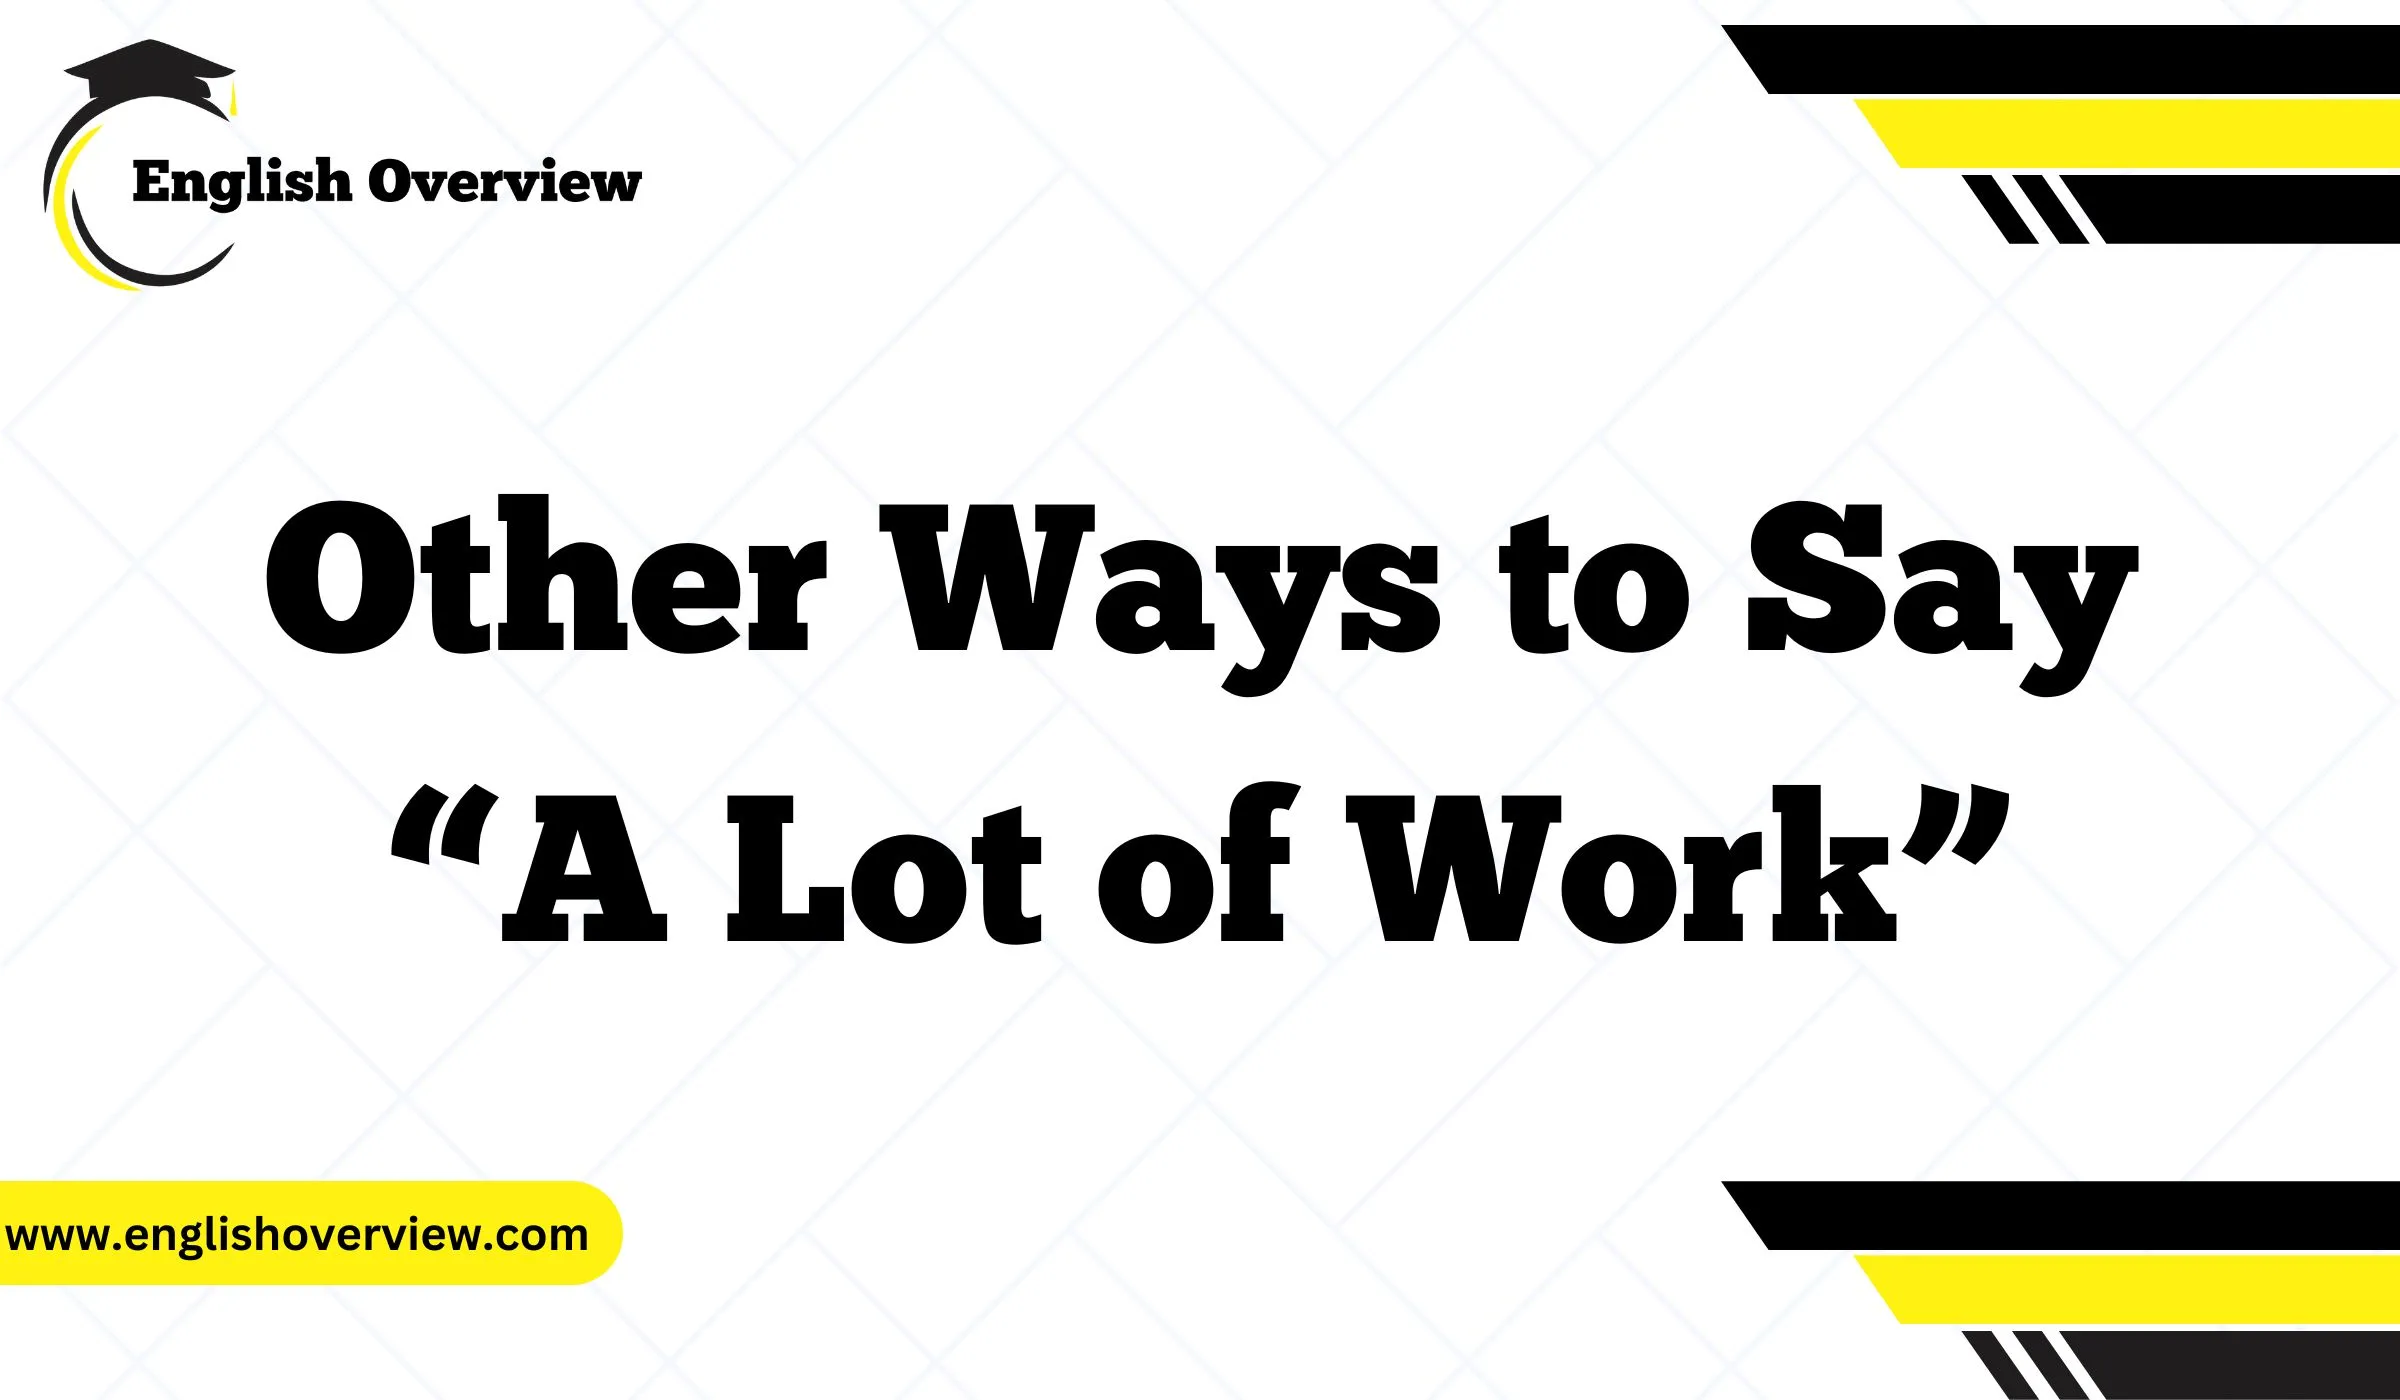 Other Ways to Say “A Lot of Work”